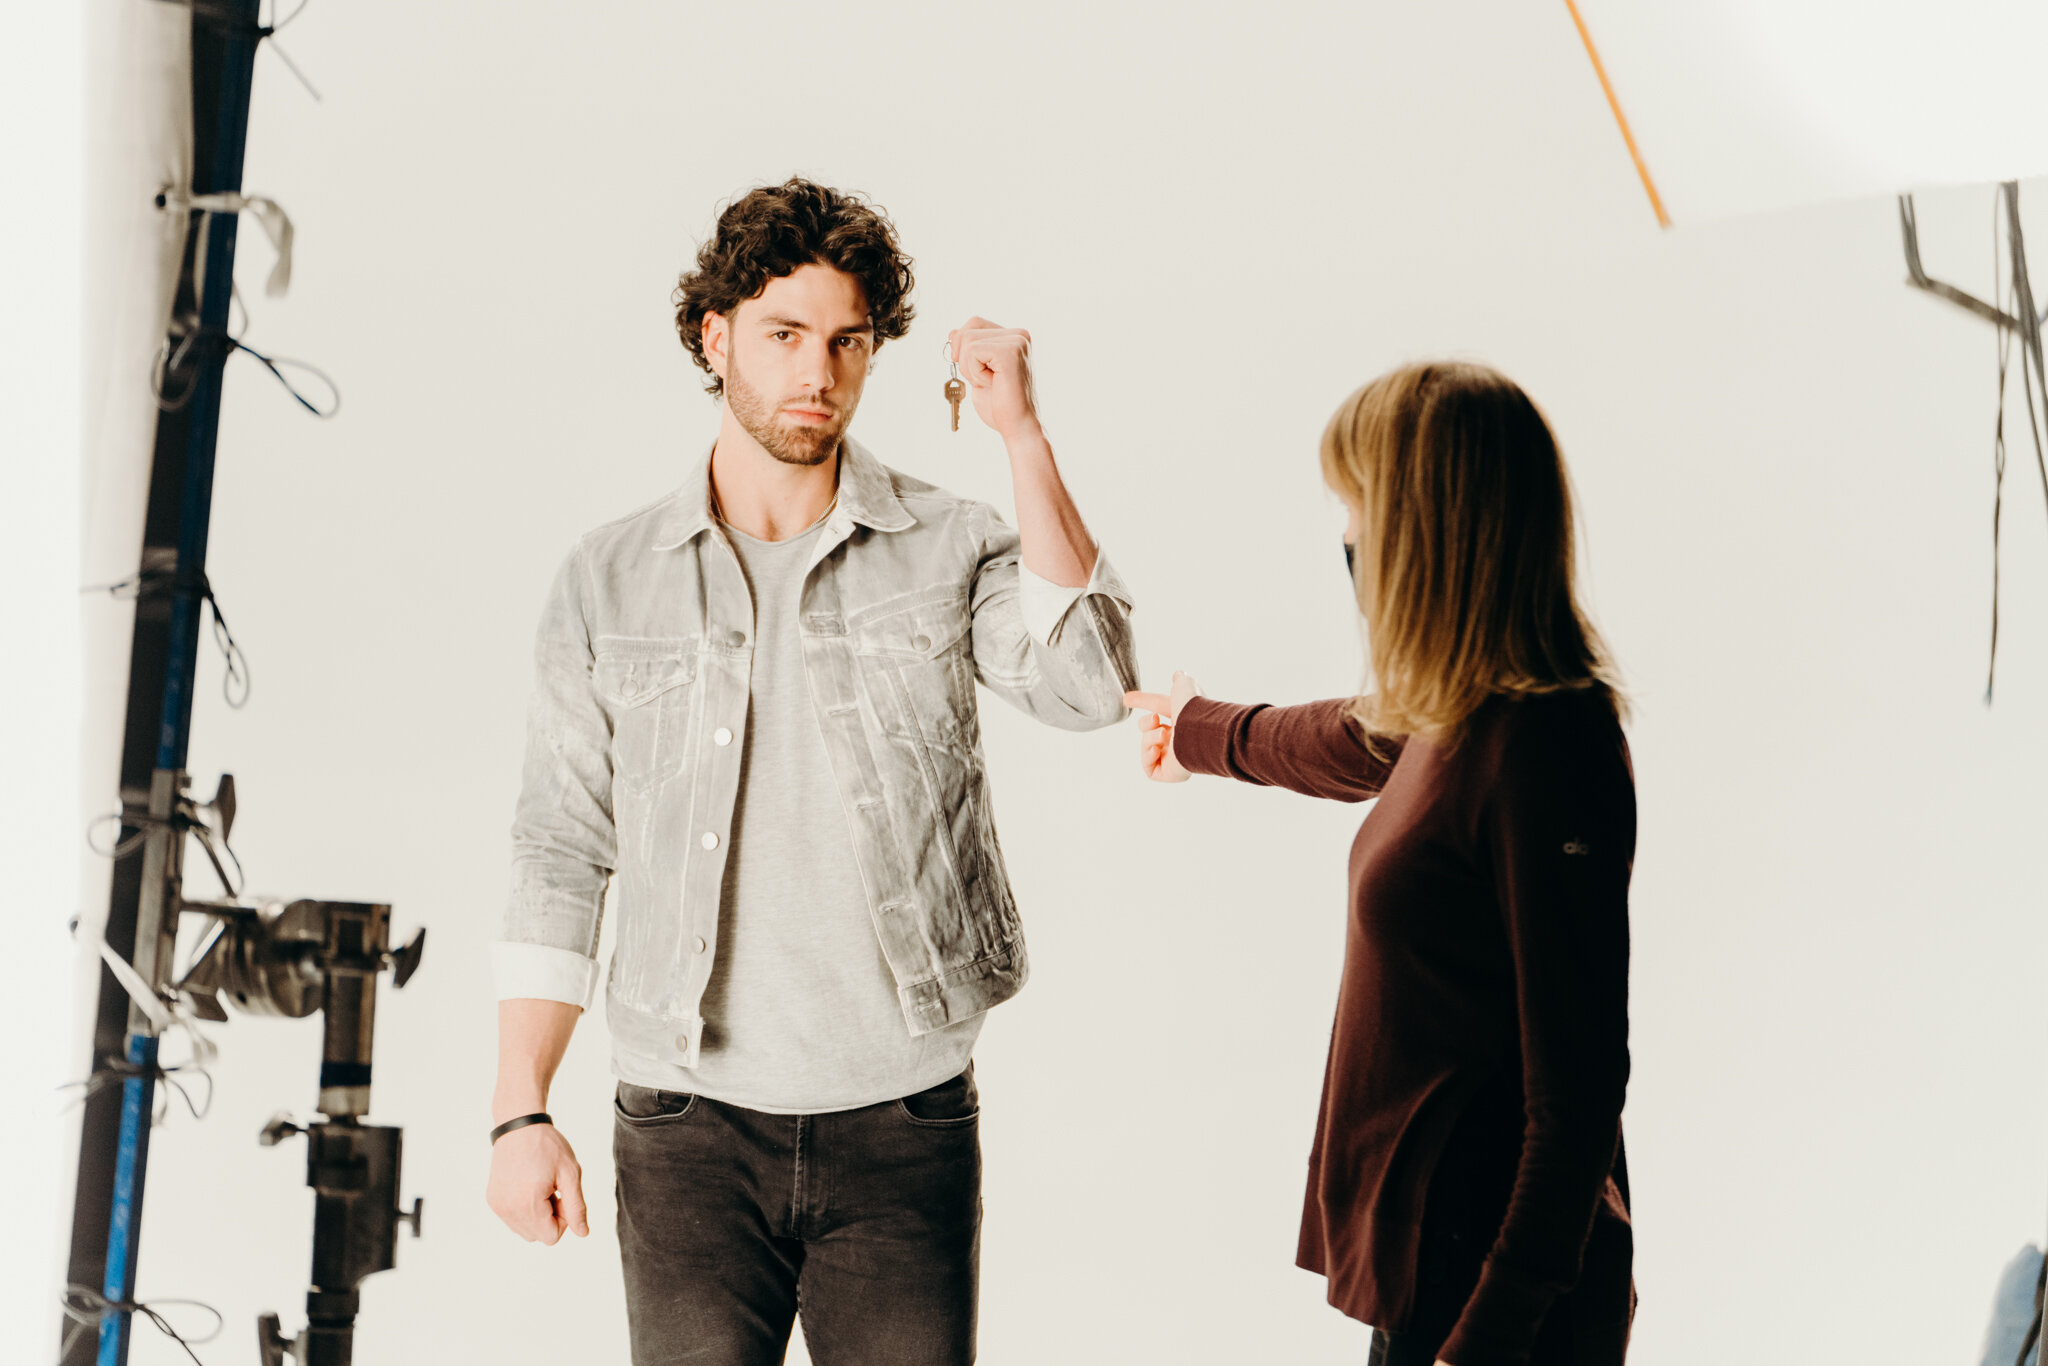 Hales Photo-LGE-Dansby Swanson-bts-atlanta commercial advertising photography celebrity portrait phtoshoot editorial-0005.jpg